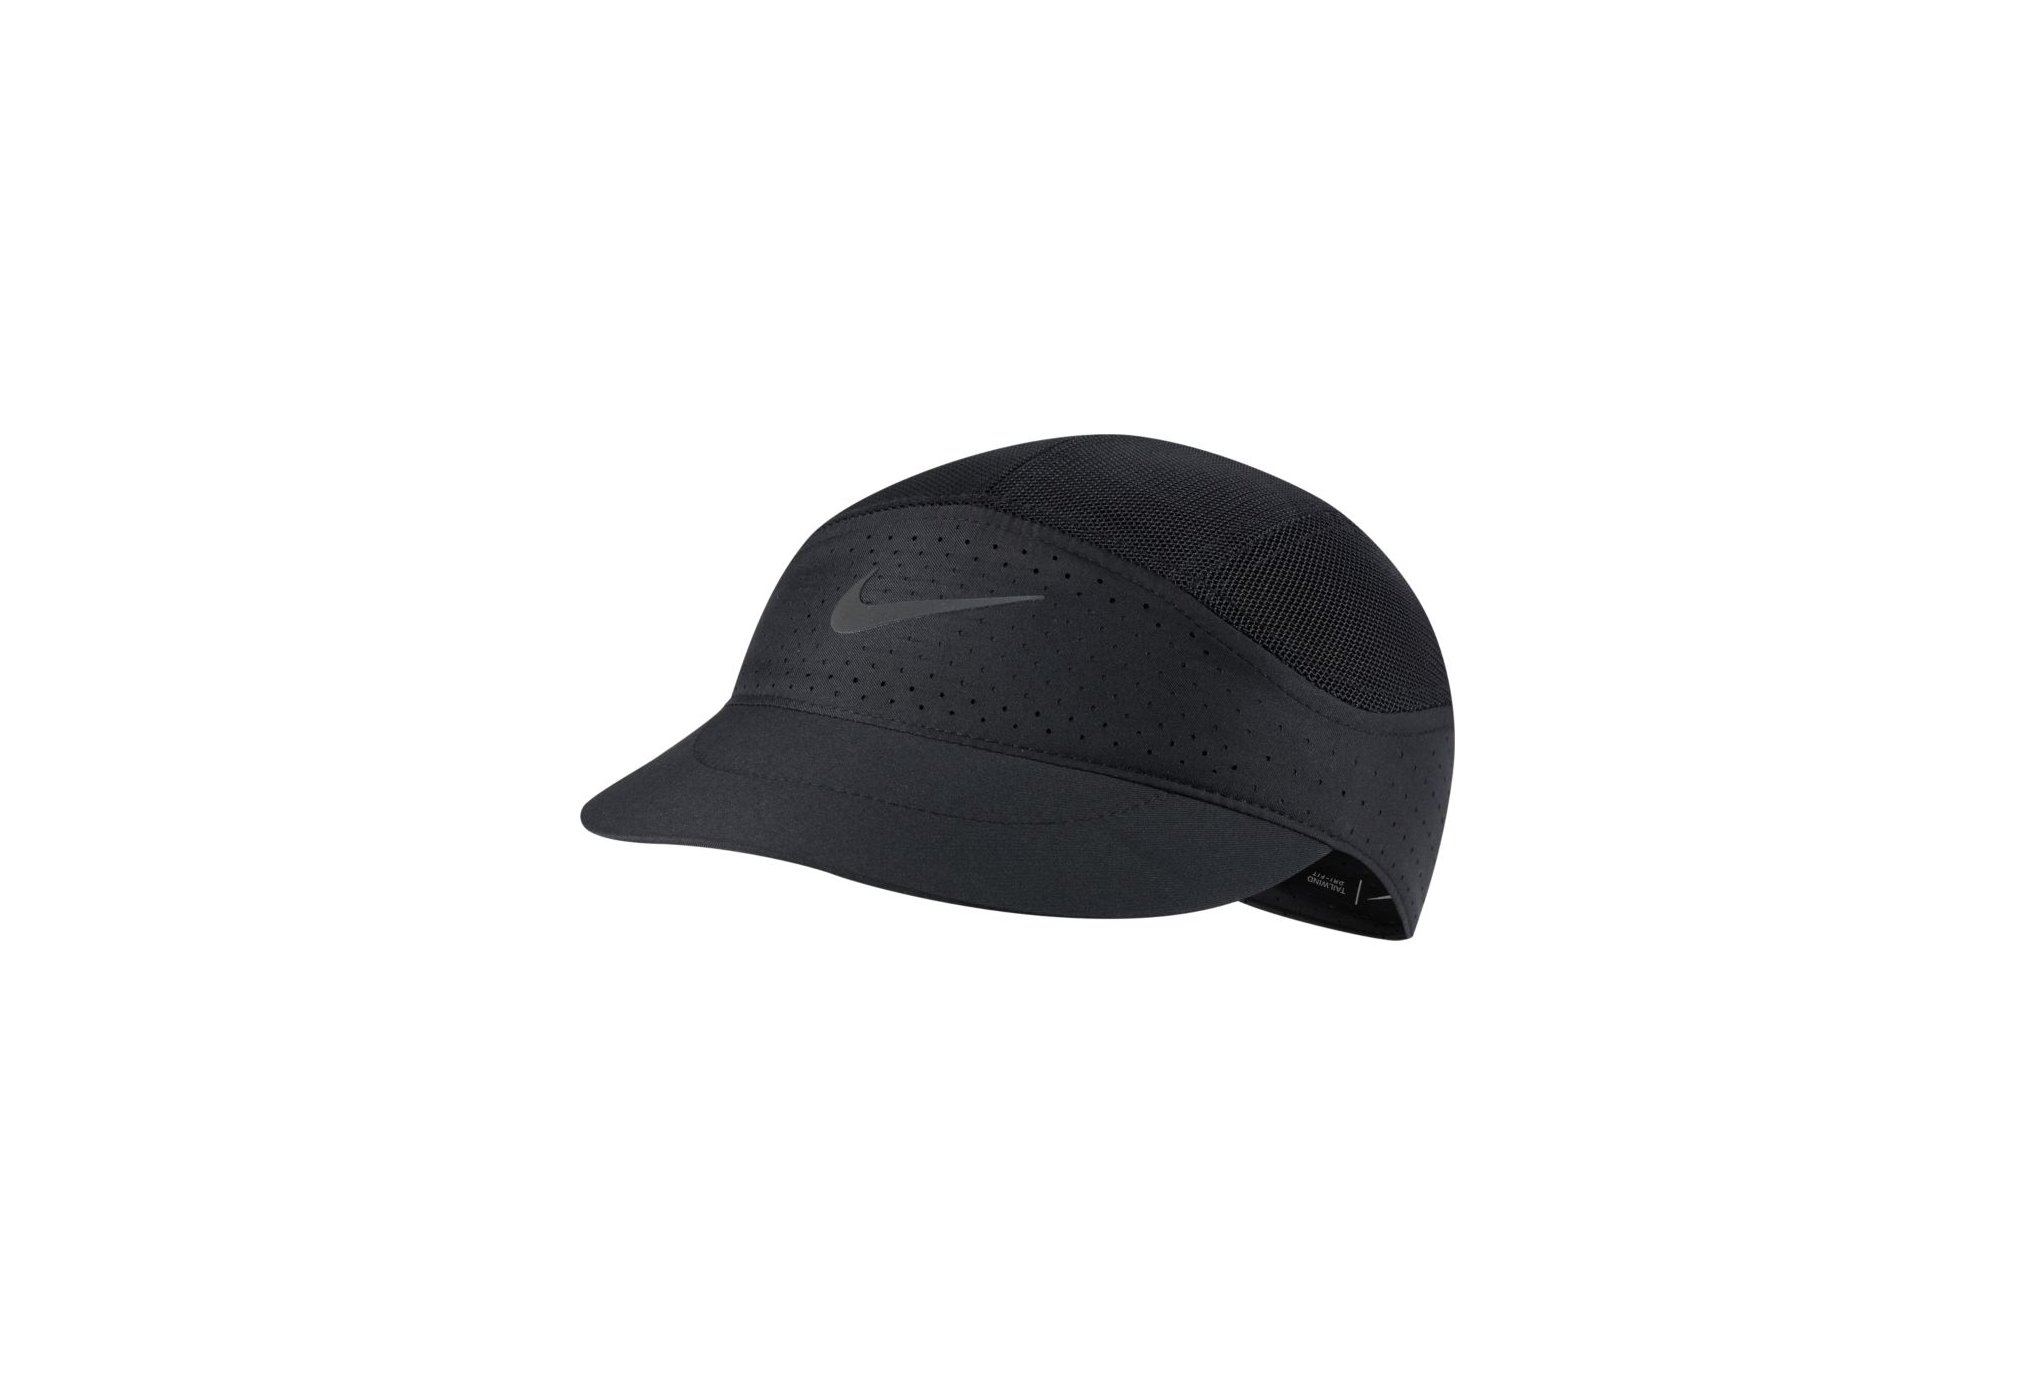 Nike Aerobill tailwind casquettes / bandeaux